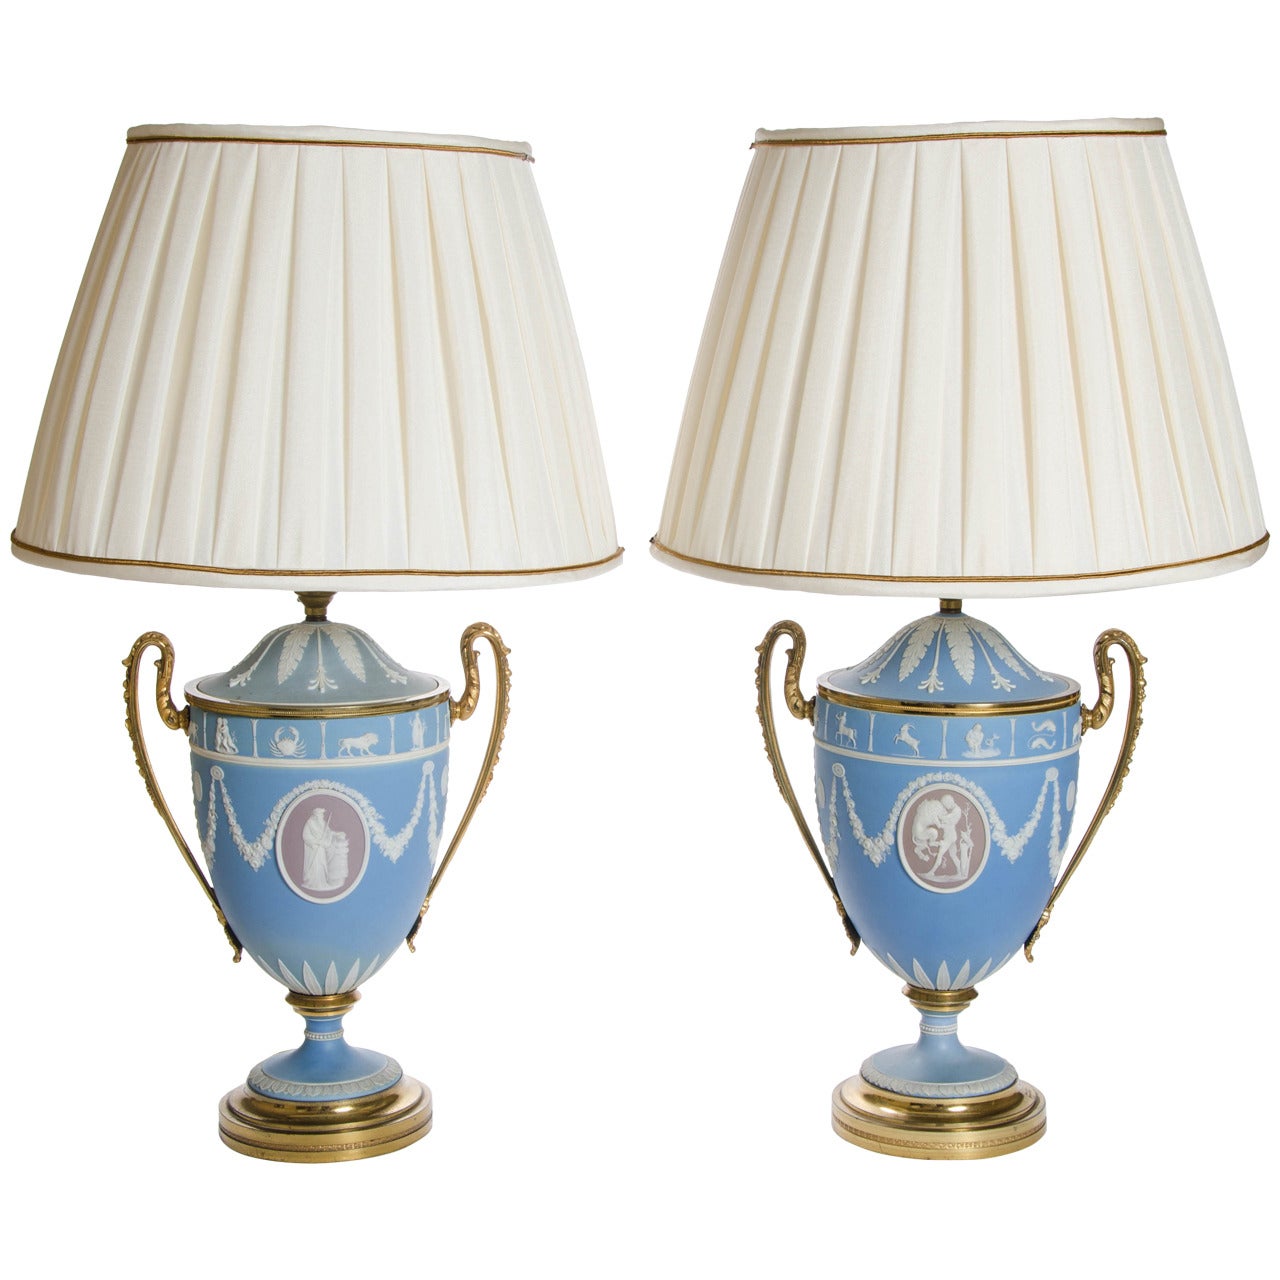 A Pair of Wedgwood Vases as Lamps with ormolu handles and bases For Sale